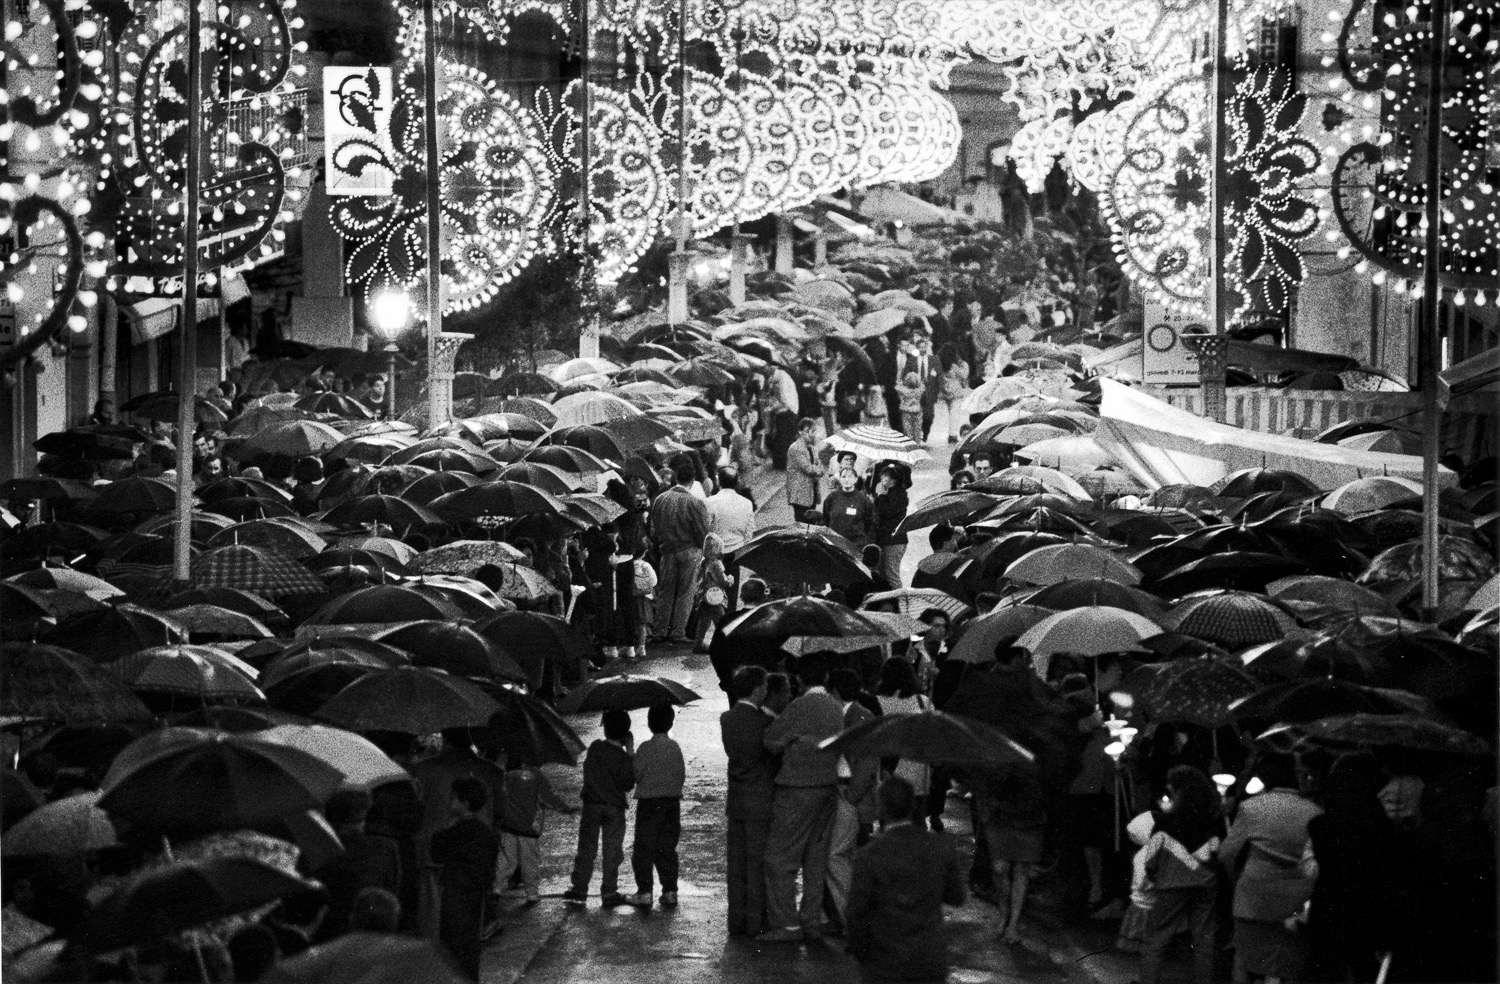 Photography Exhibition Gianni Berengo Gardin Festivals Balls Rites And Celebrations Throughout Italy